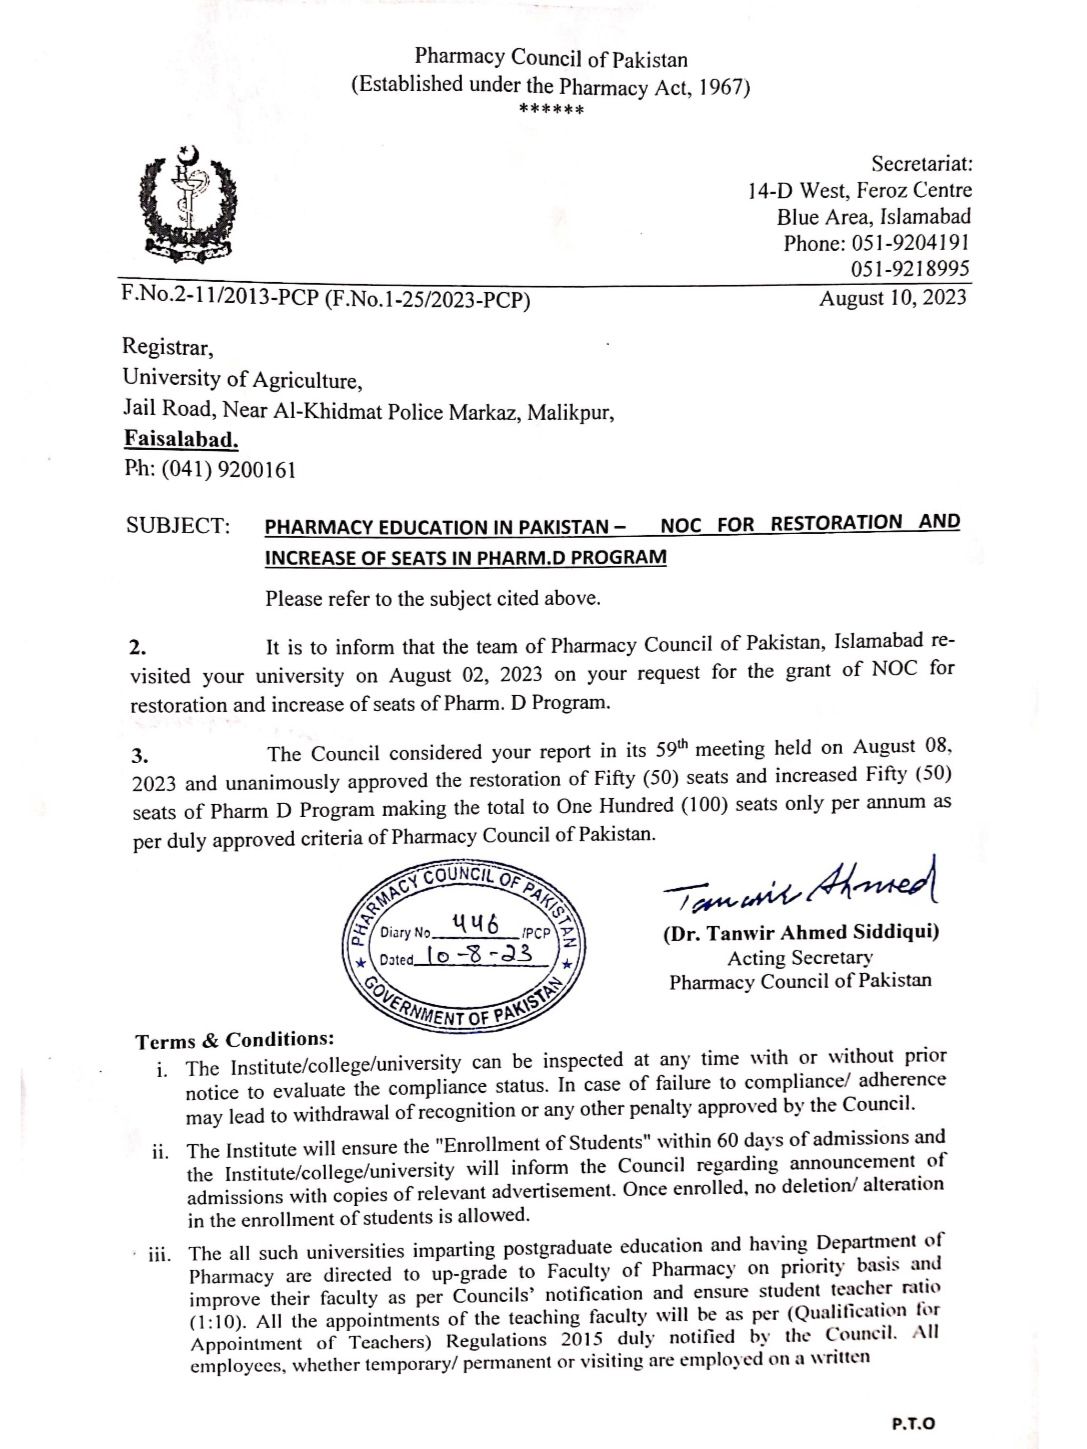 Pharmacy Council of Pakistan granted NOC for Pharm. D Classes to University of Agriculture 